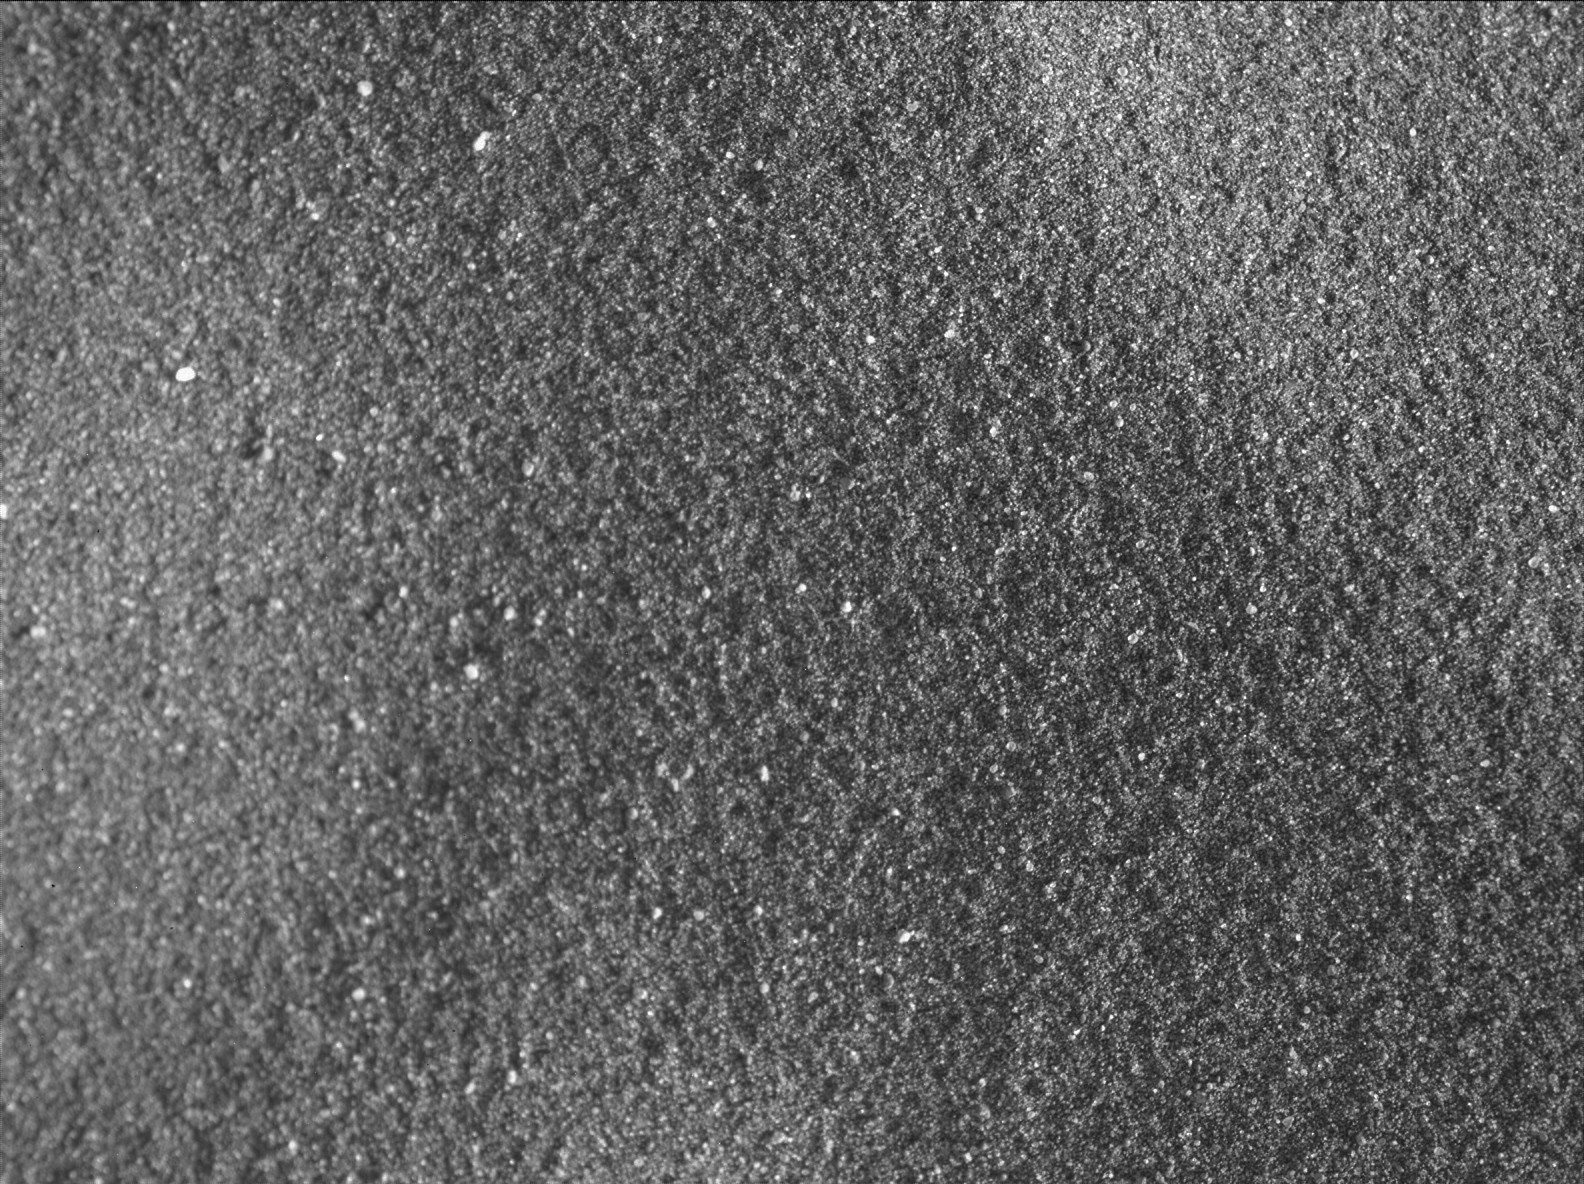 Nasa's Mars rover Curiosity acquired this image using its Mars Hand Lens Imager (MAHLI) on Sol 1618